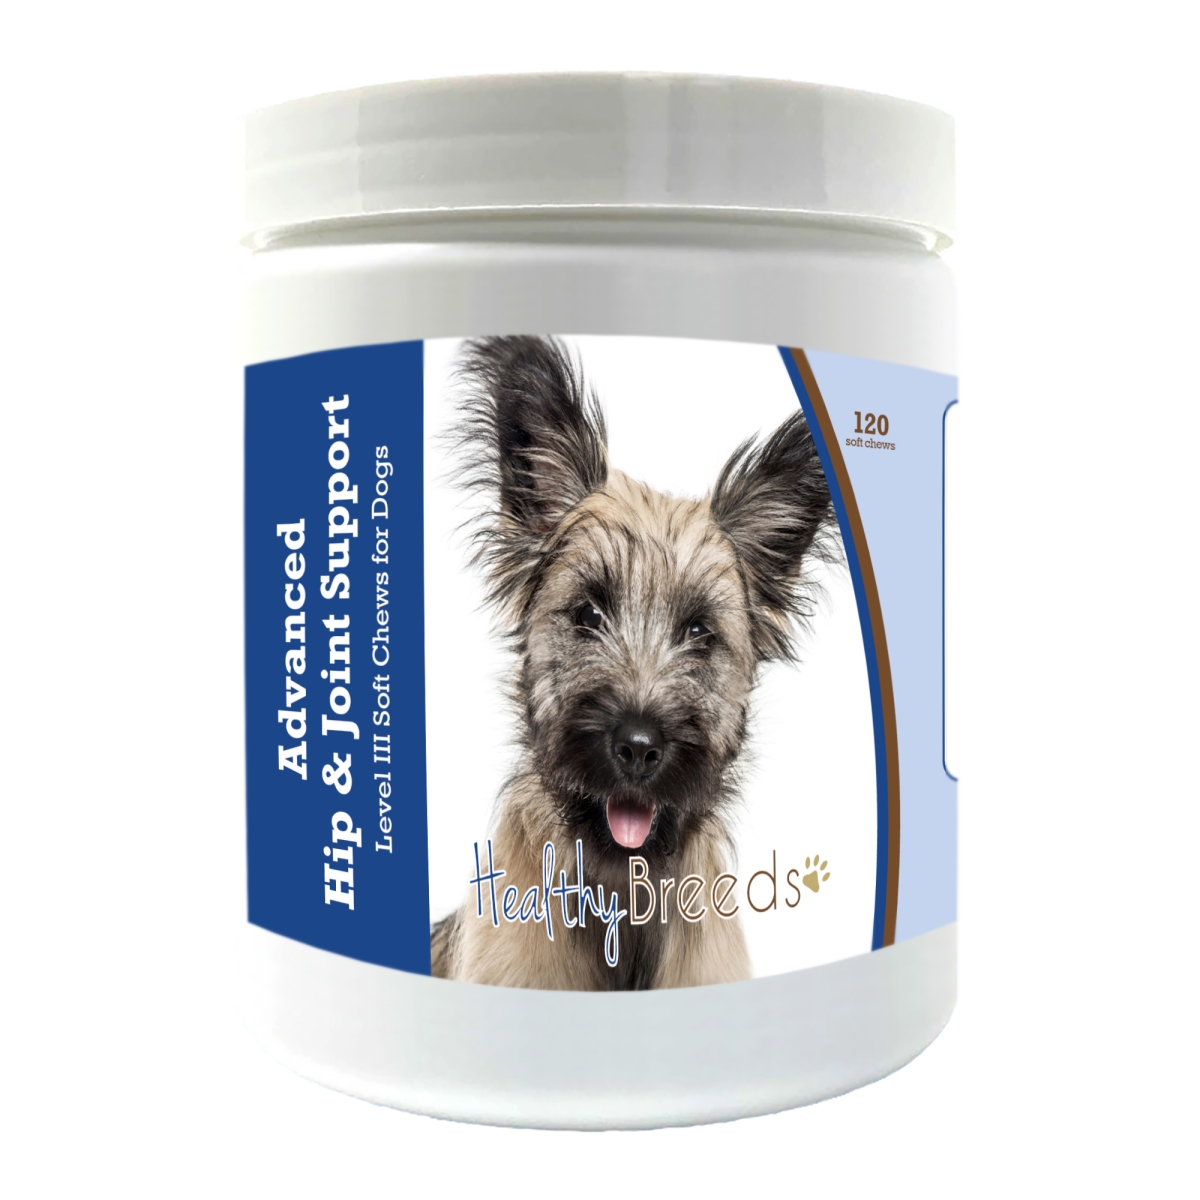 Picture of Healthy Breeds 192959899276 Skye Terrier Advanced Hip & Joint Support Level III Soft Chews for Dogs